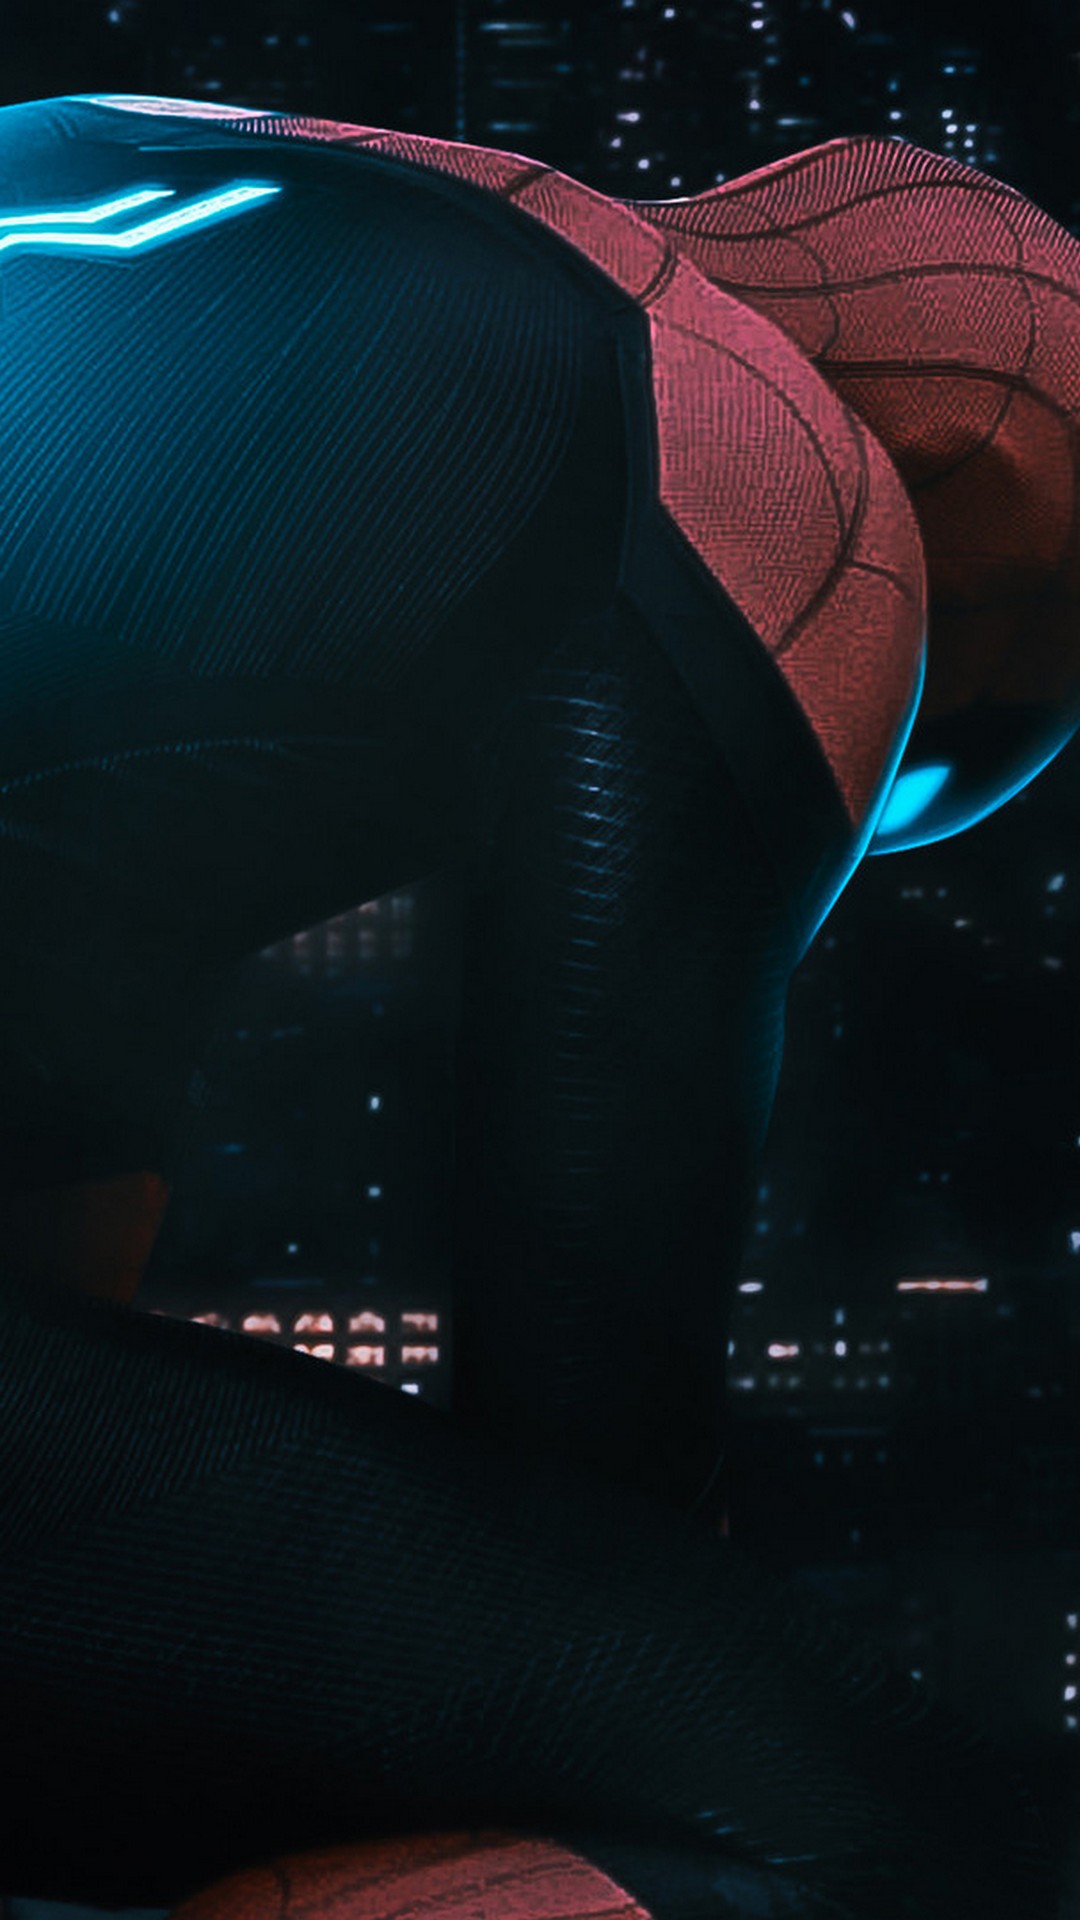 Spider-Man Far From Home Phone Wallpaper with high-resolution 1080x1920 pixel. Download all Mobile Wallpapers and Use them as wallpapers for your iPhone, Tablet, iPad, Android and other mobile devices